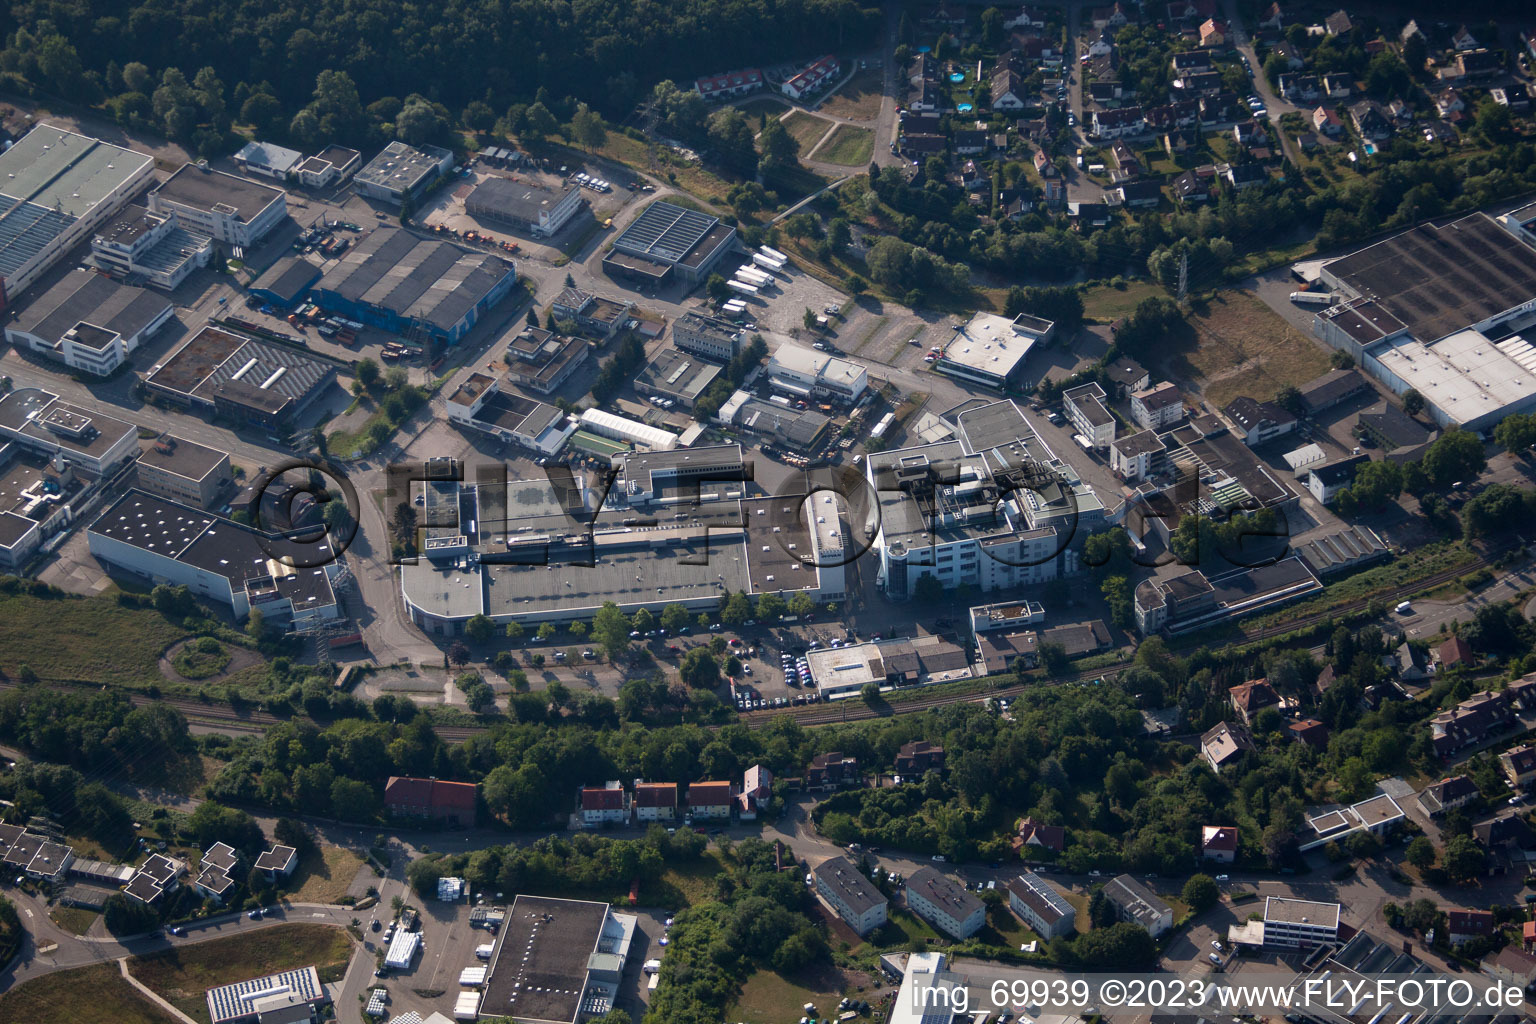 Birkenfeld in the state Baden-Wuerttemberg, Germany from above